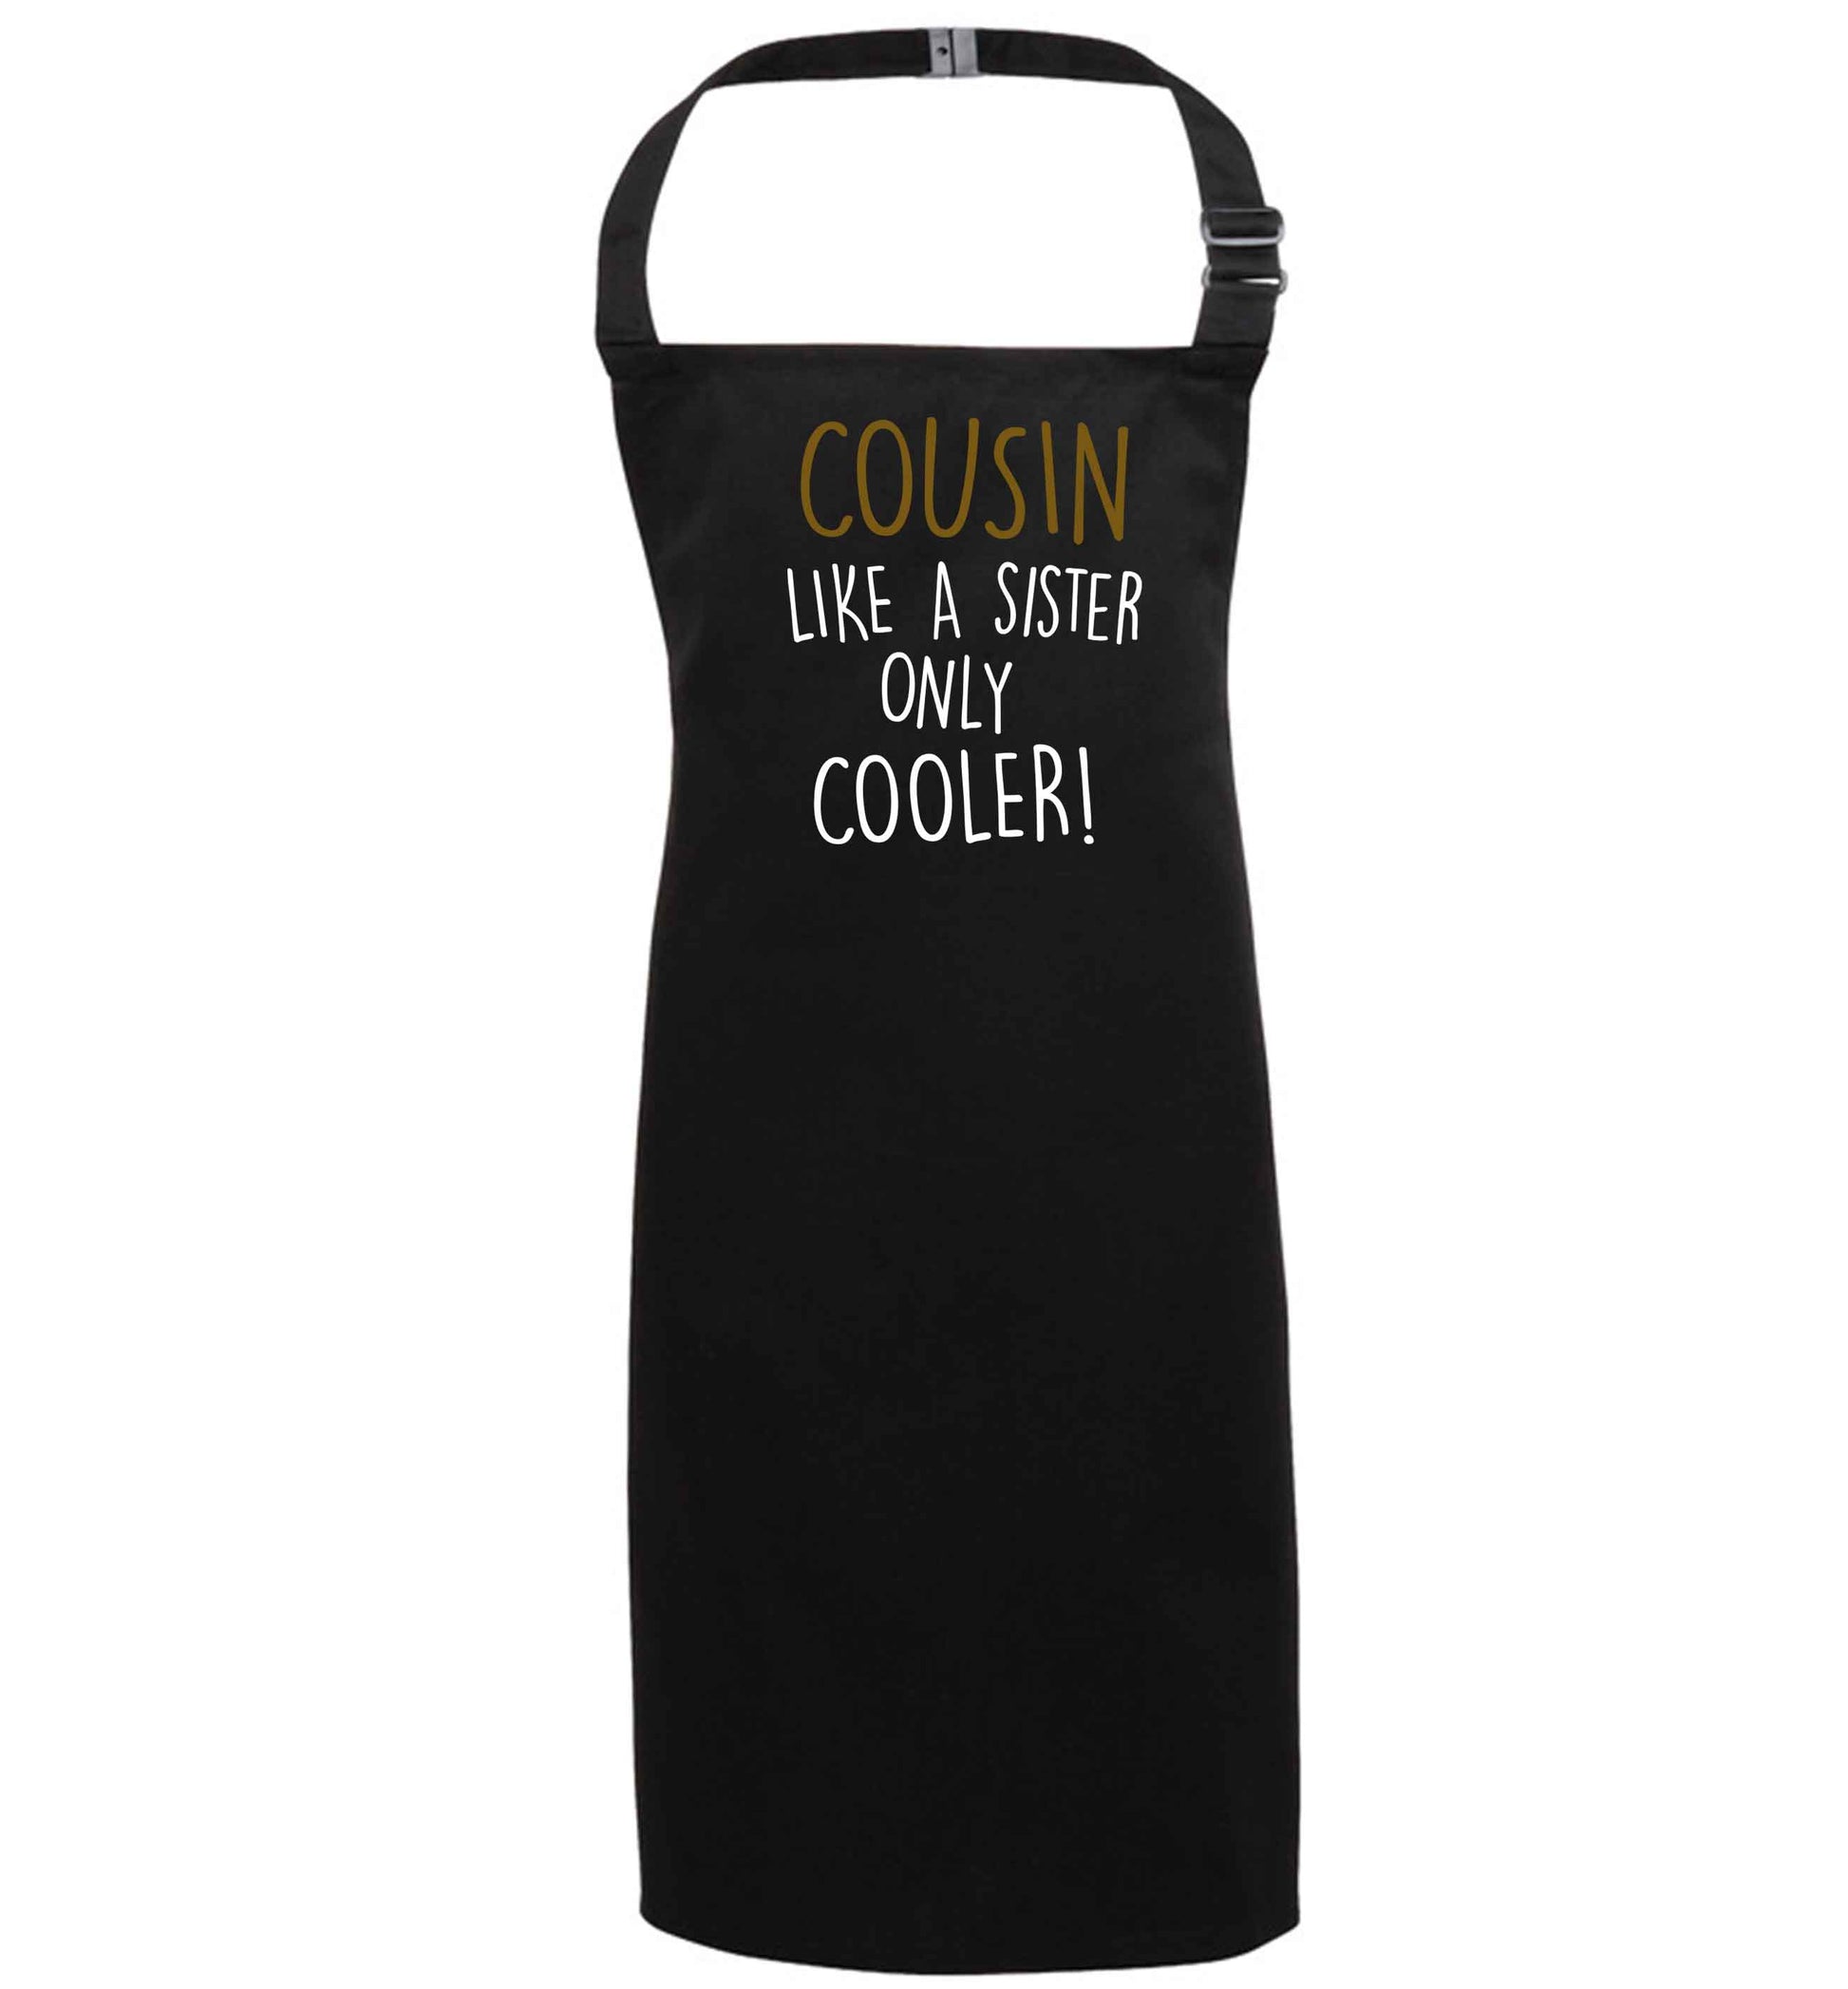 Cousin like a sister only cooler black apron 7-10 years